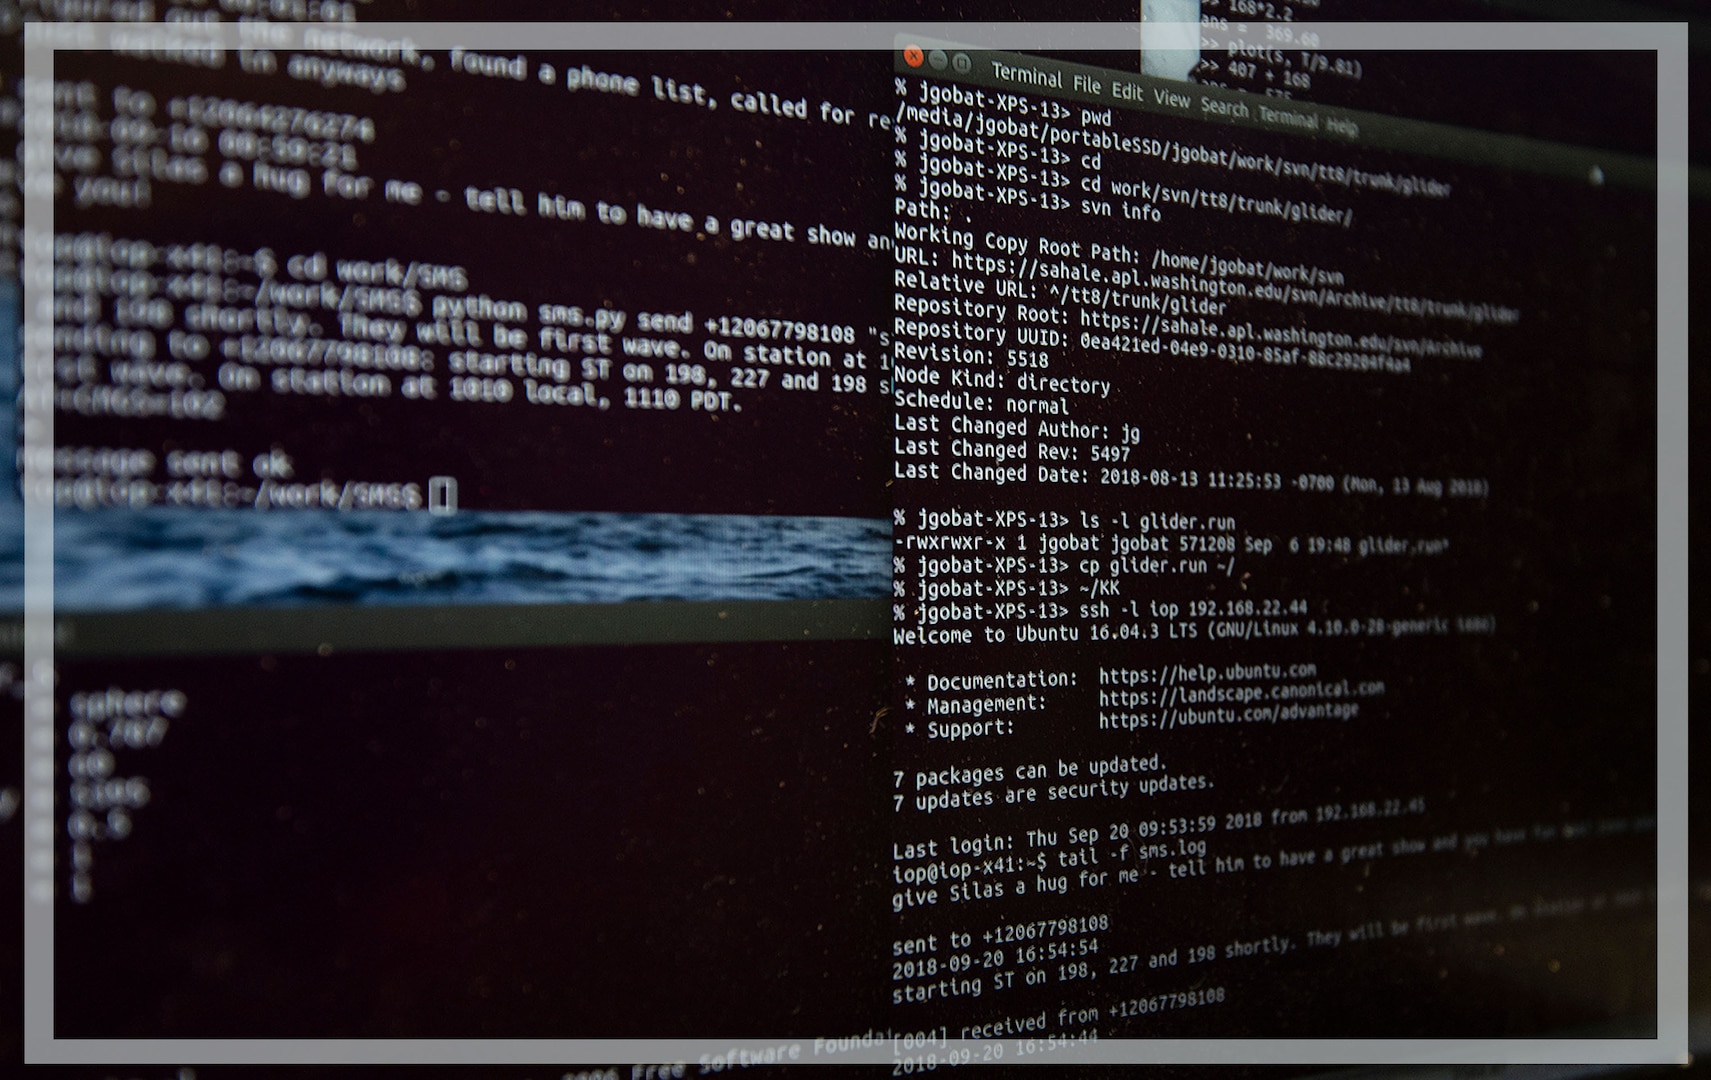 A photo of a black computer screen with code or some sort of text shown.